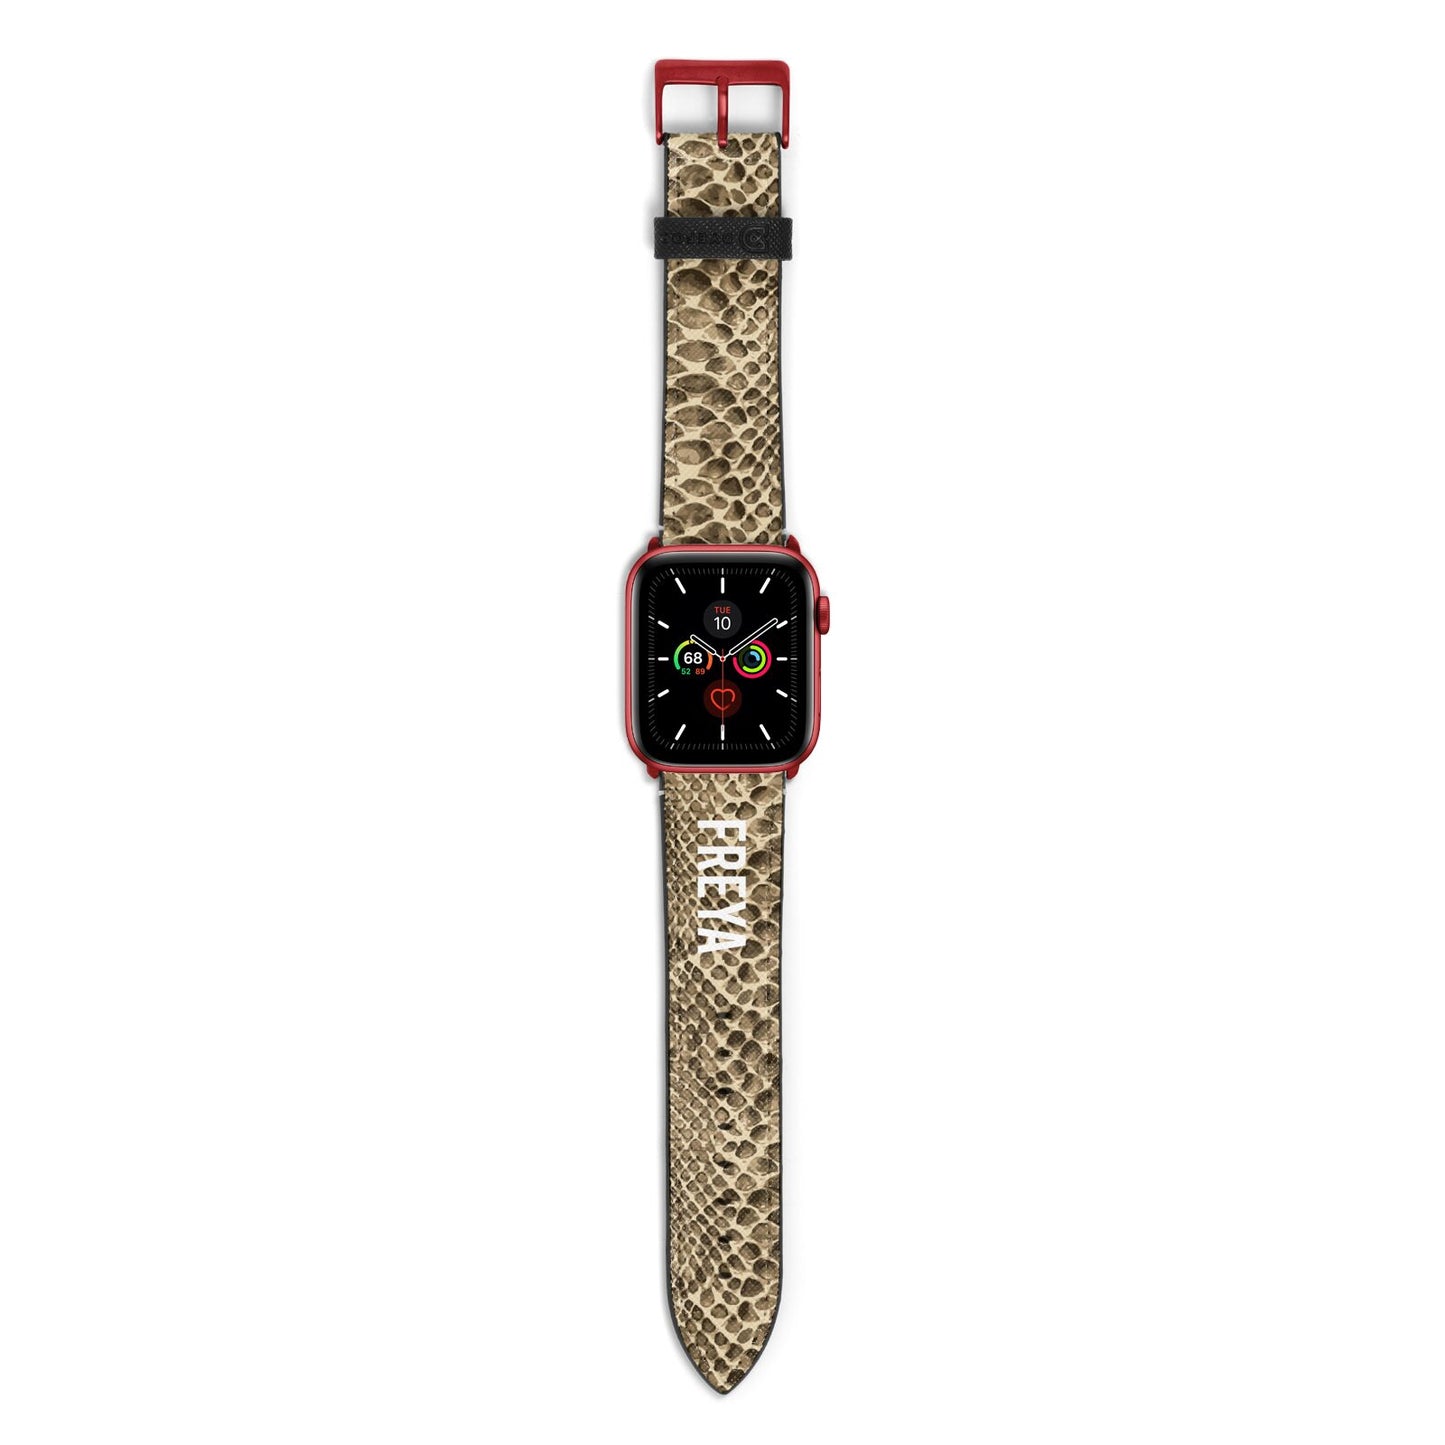 Personalised Tan Snakeskin Apple Watch Strap with Red Hardware